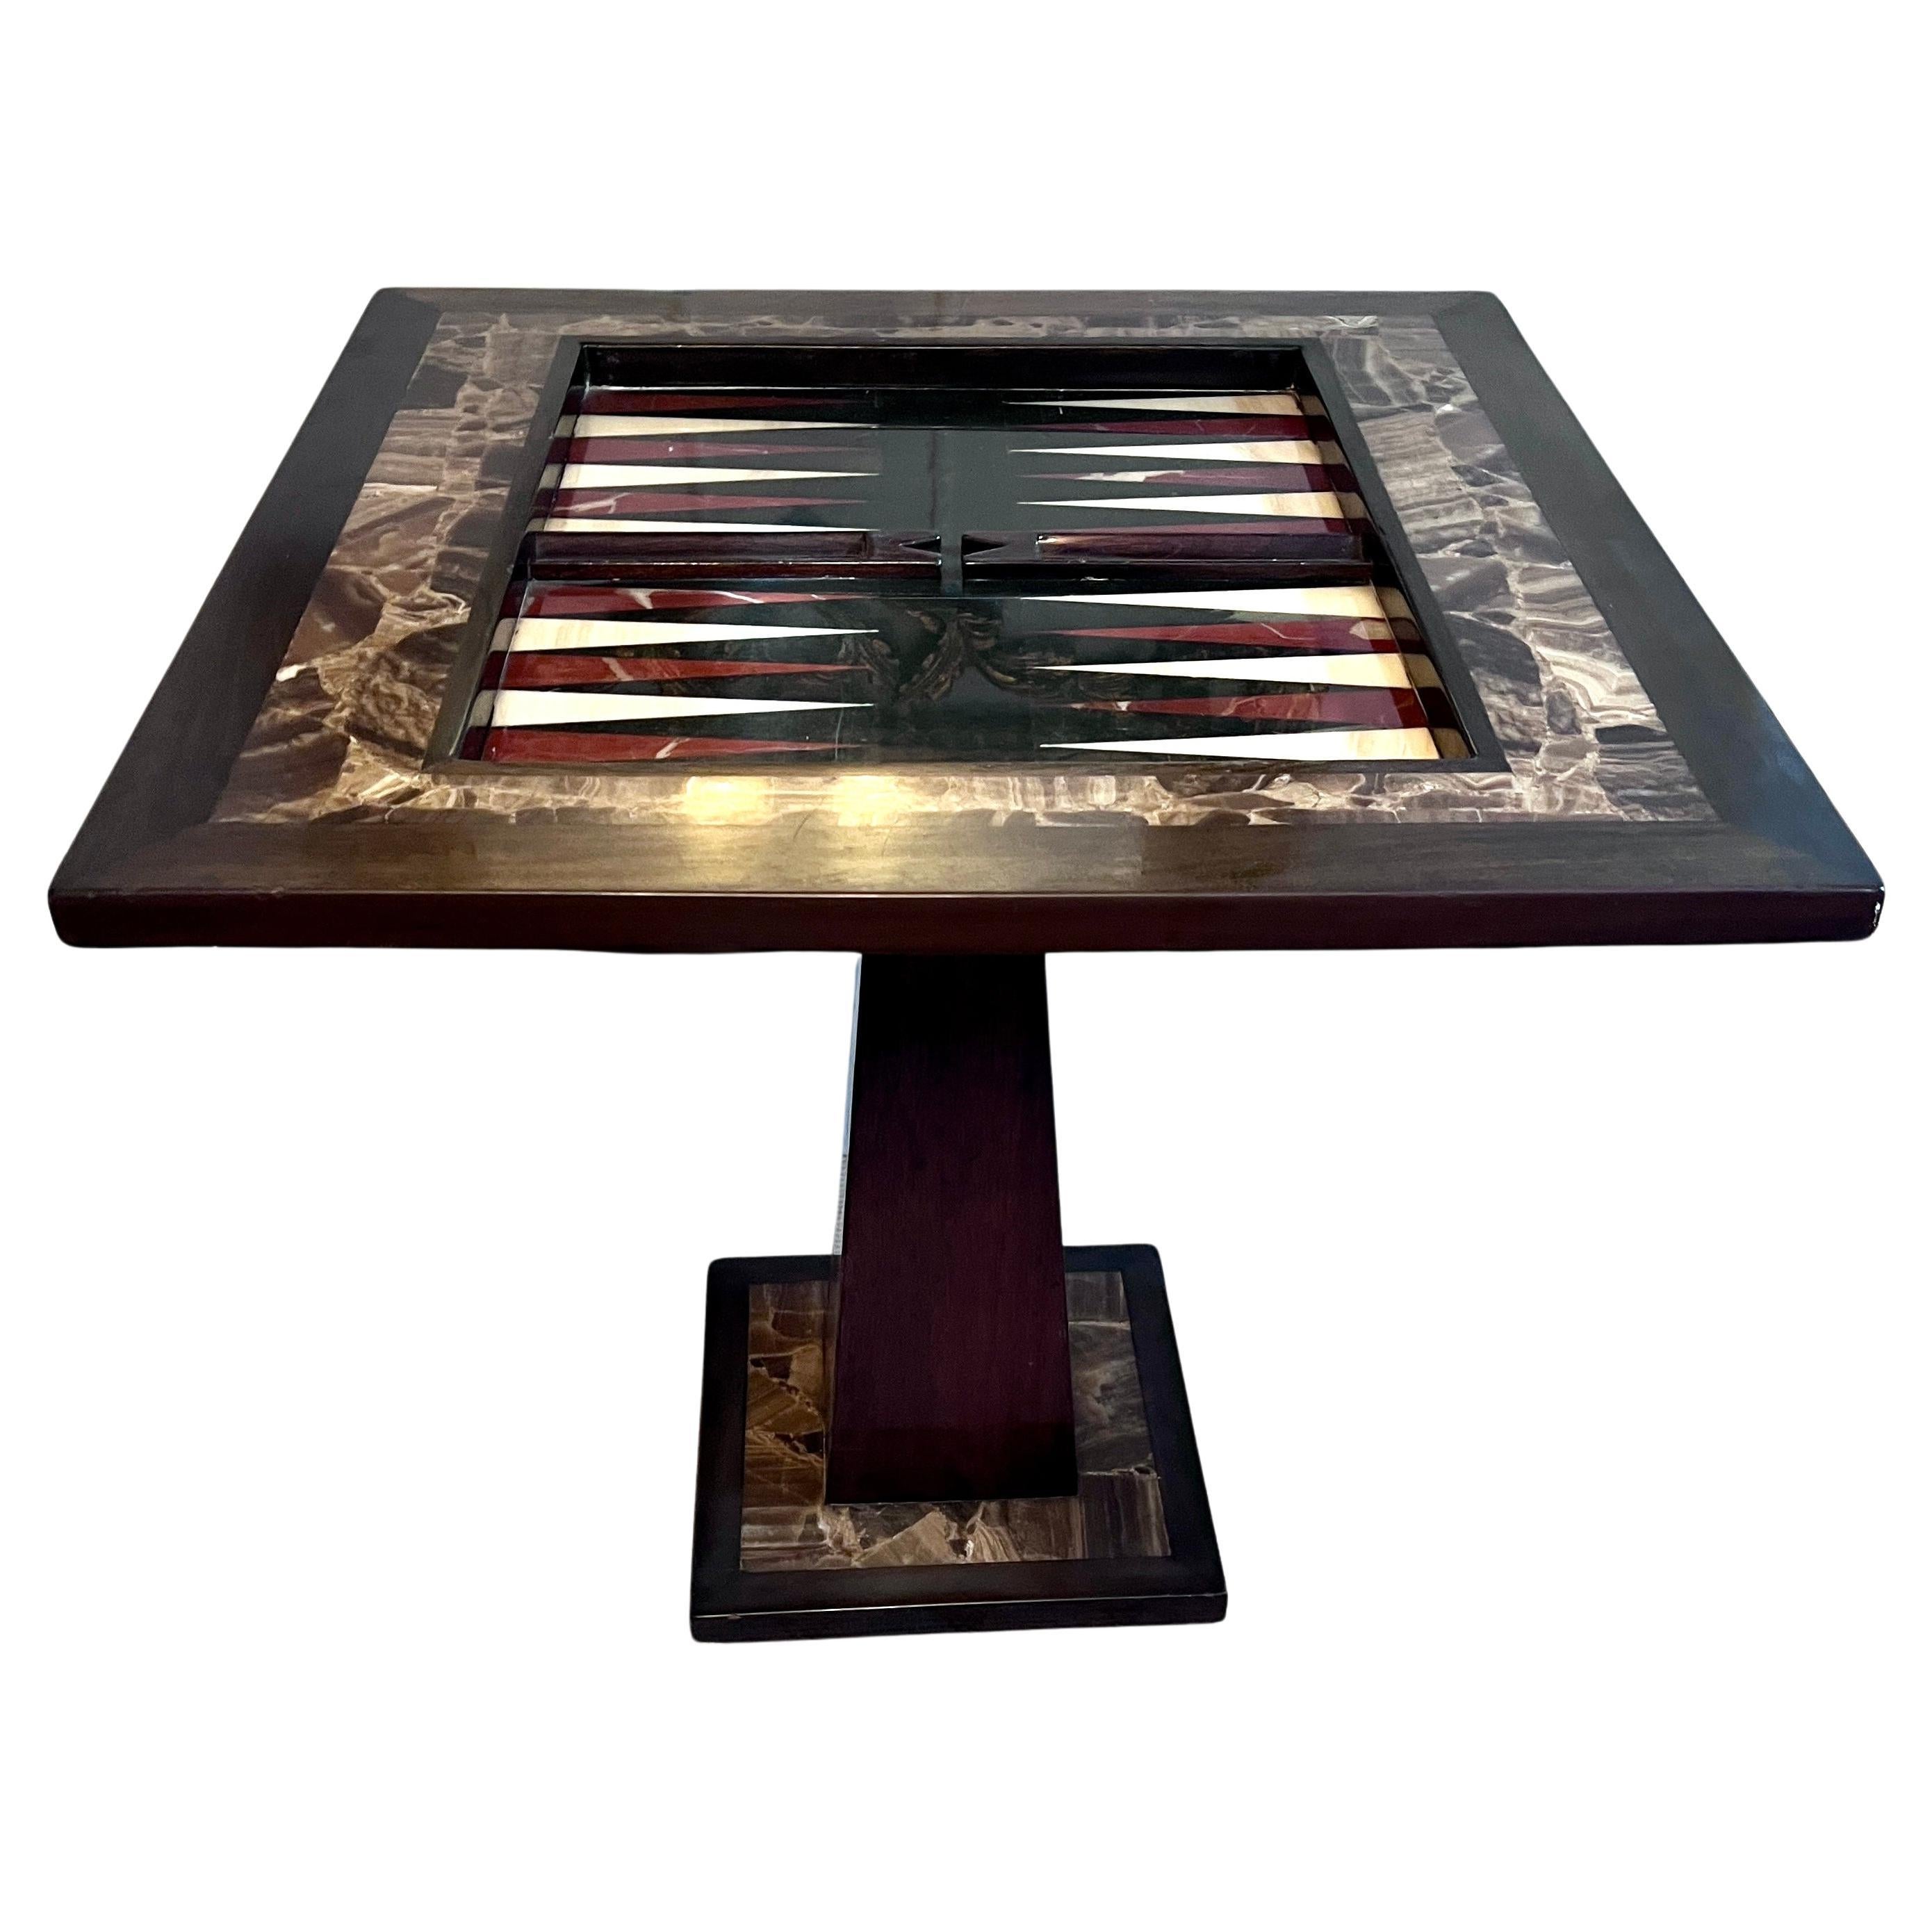 Attributed Arturo Pani Onyx Walnut Game Table with Chess Checkers and Backgammon For Sale